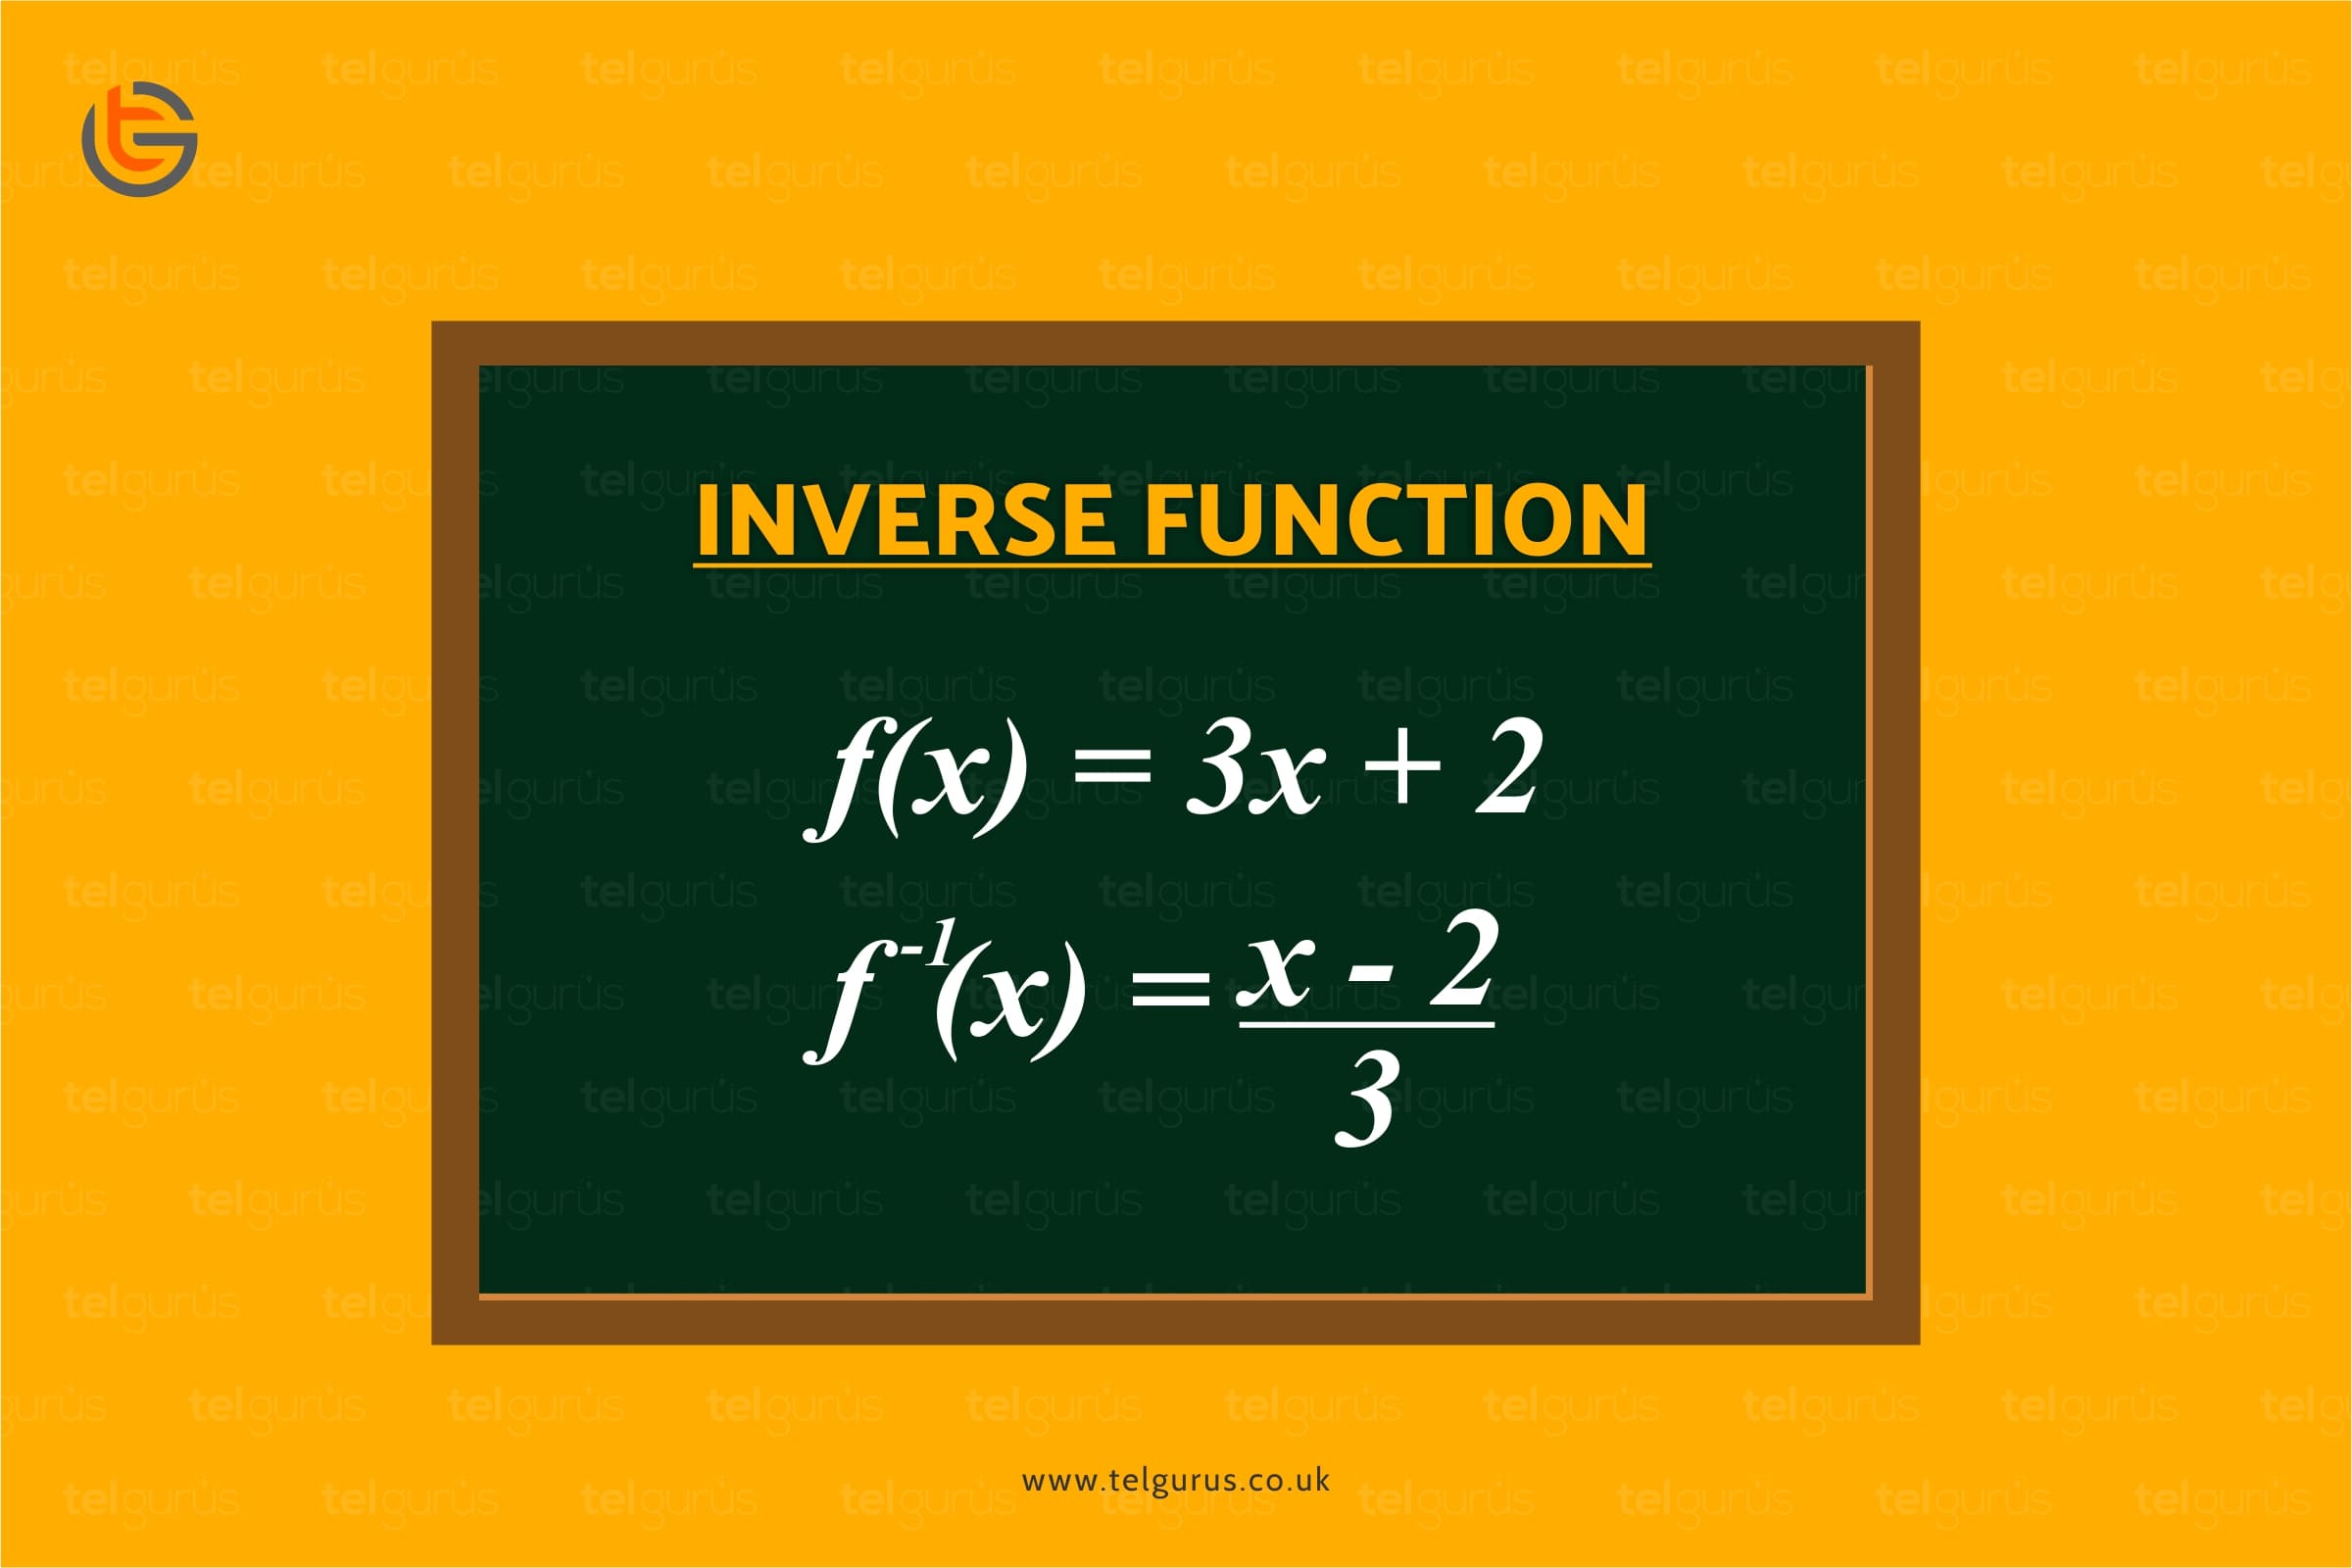 What is an Inverse function?